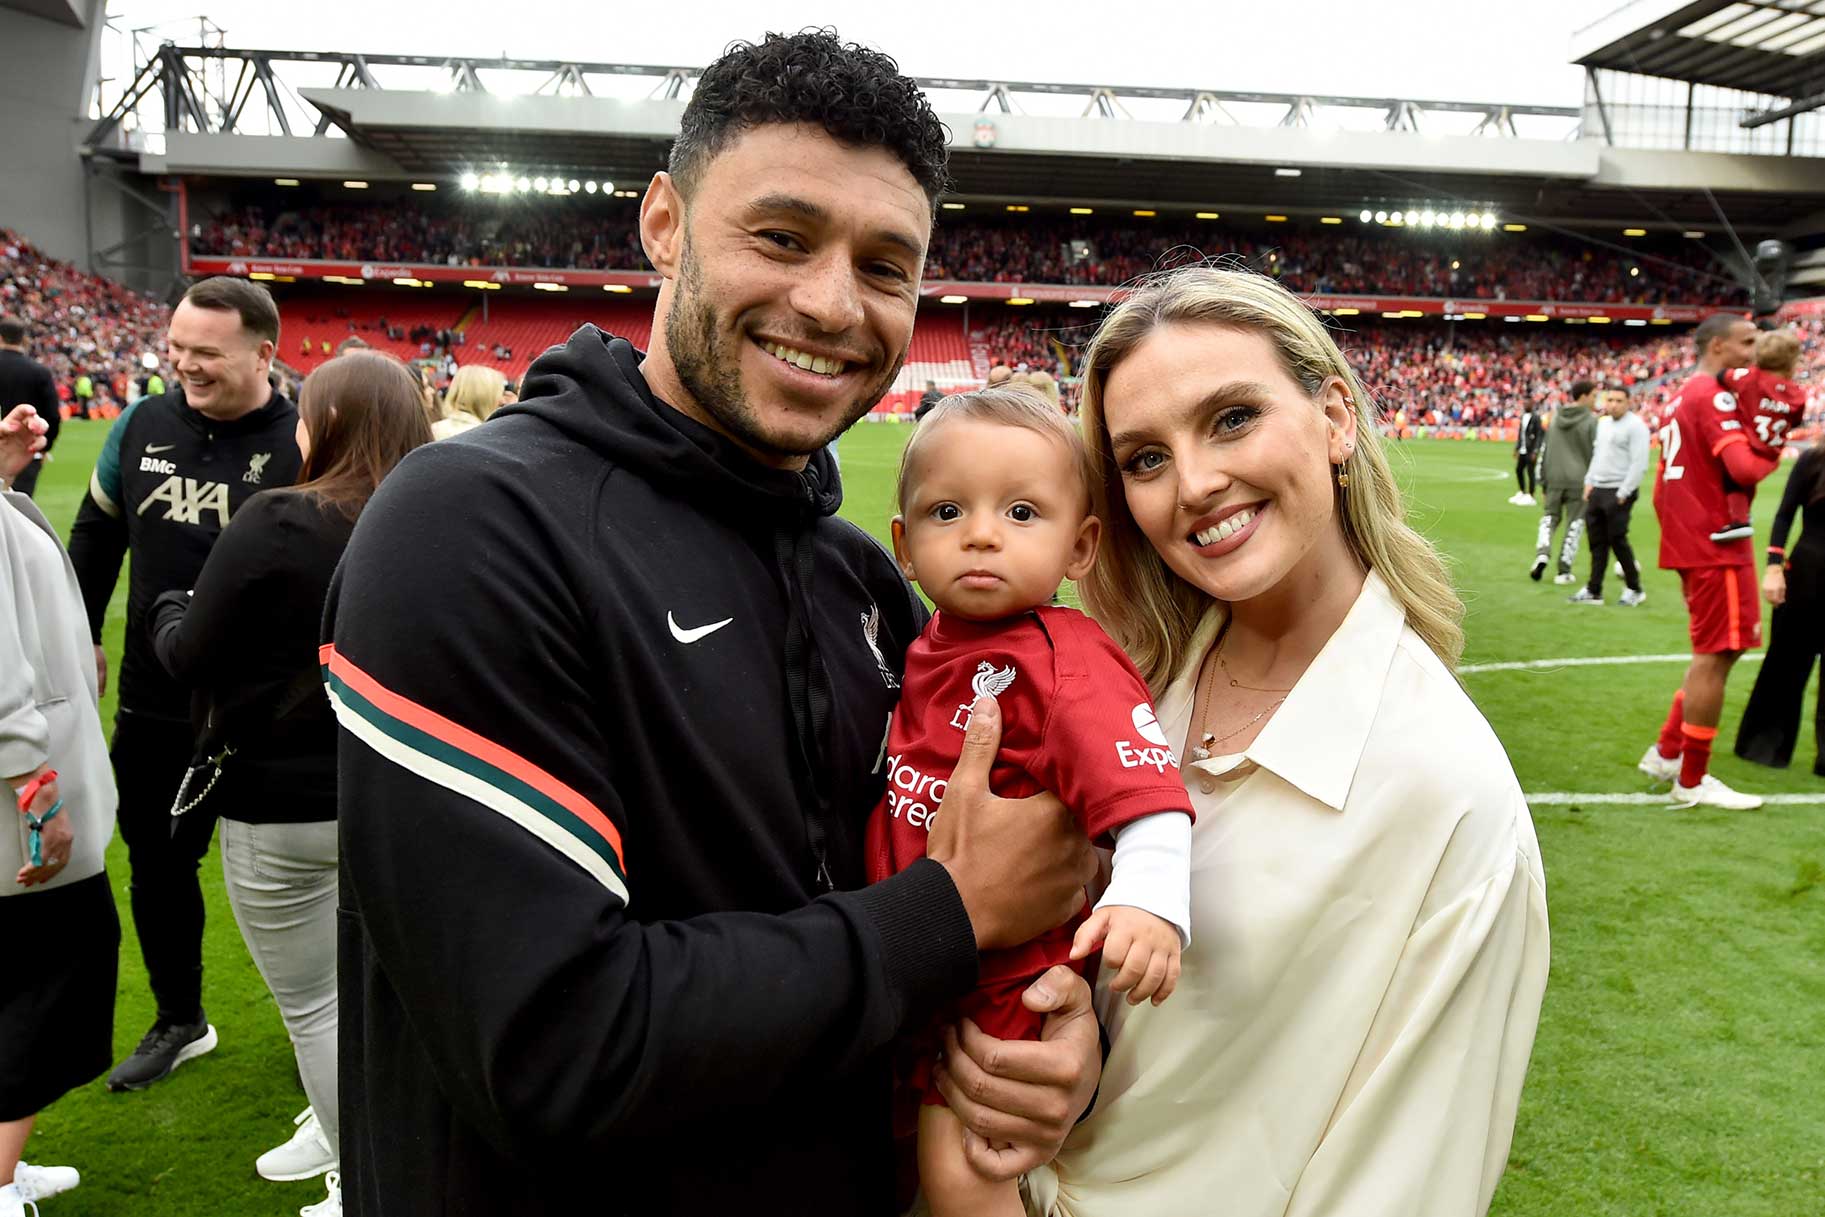 Alex Oxlade-Chamberlain of Liverpool posing for a photograph with Perrie Edwards and their baby boy at the end of the Premier League match between Liverpool and Wolverhampton Wanderers